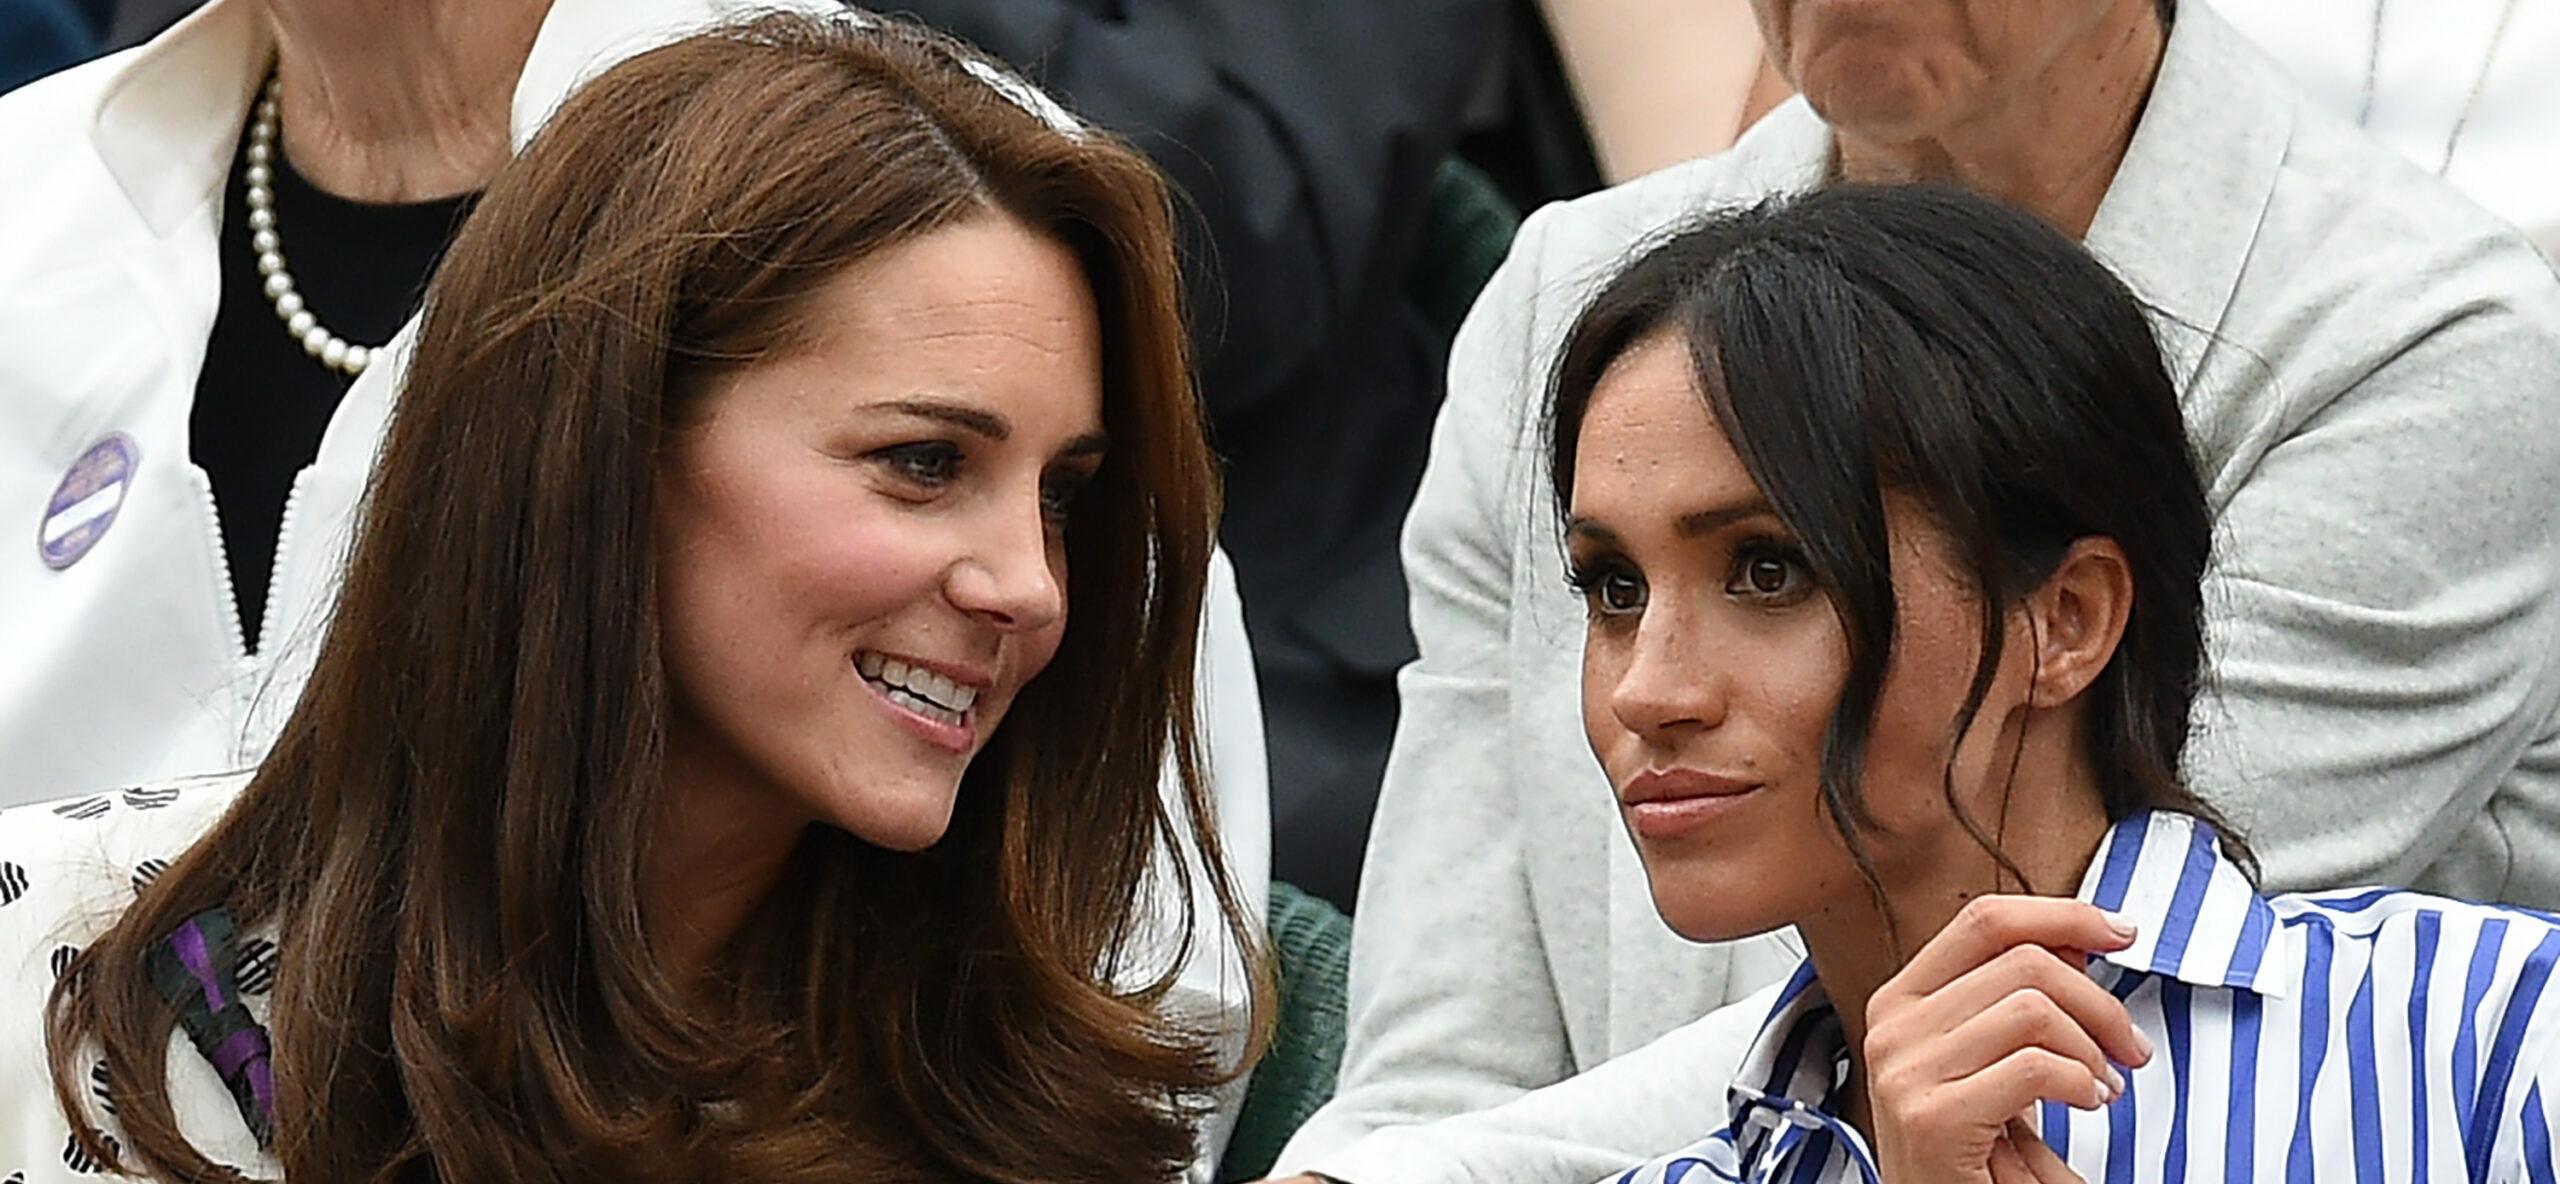 Kate Middleton’s Uncle Accuses Meghan Markle Of ‘Creating Drama’ In The Royal Family